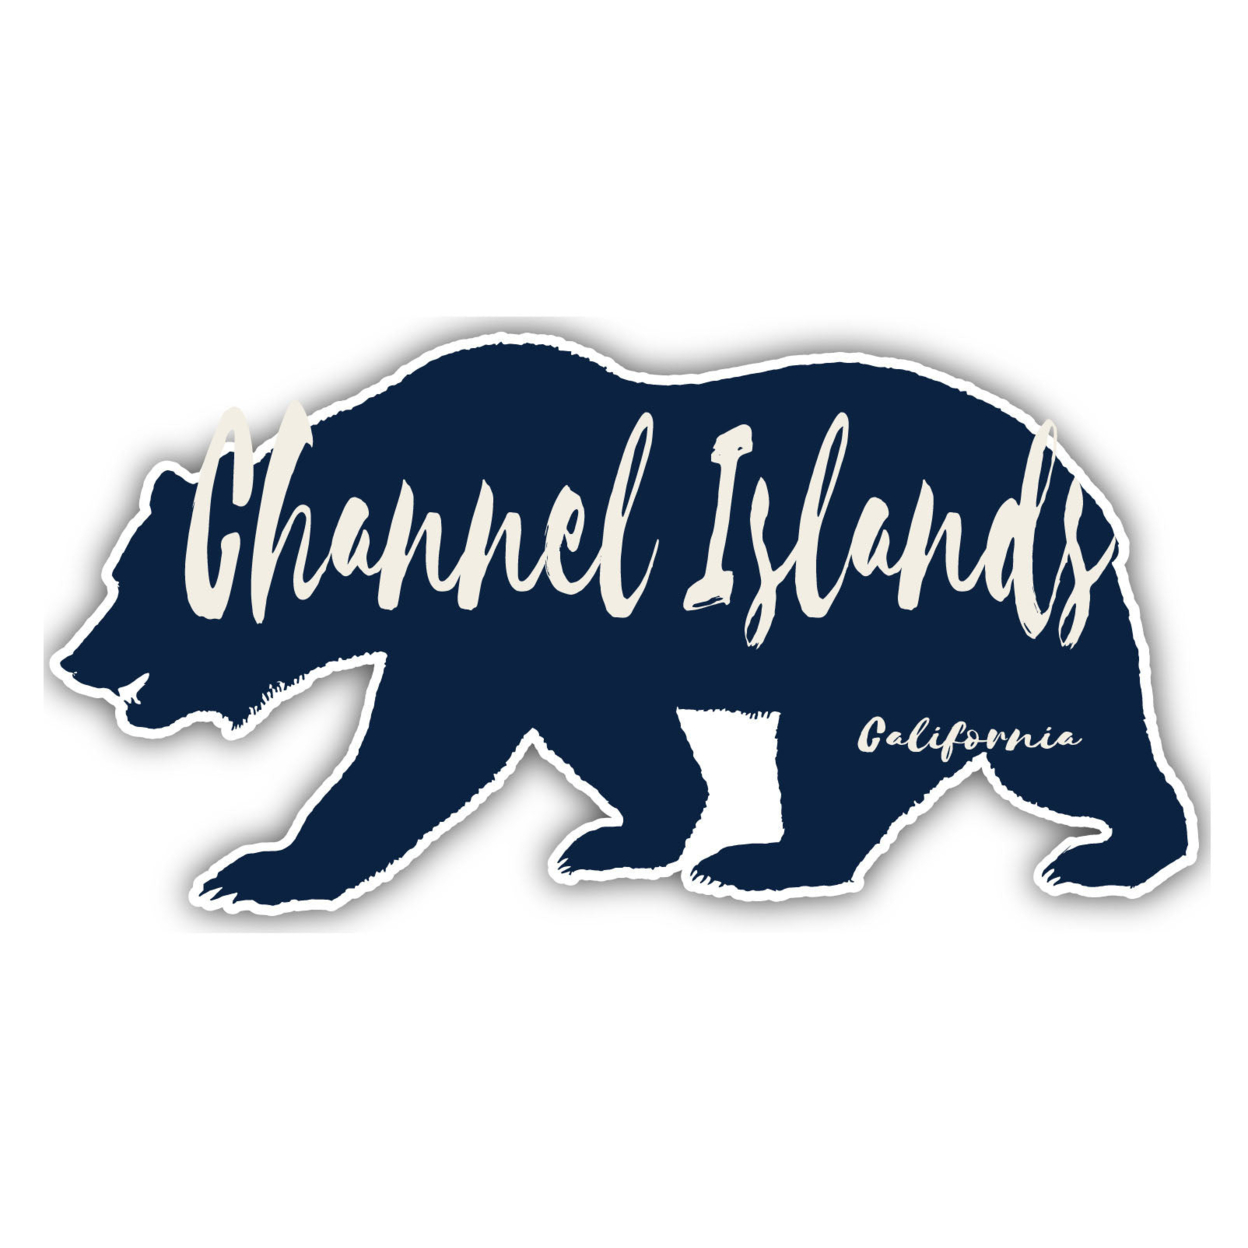 Channel Islands California Souvenir Decorative Stickers (Choose Theme And Size) - 4-Pack, 10-Inch, Bear